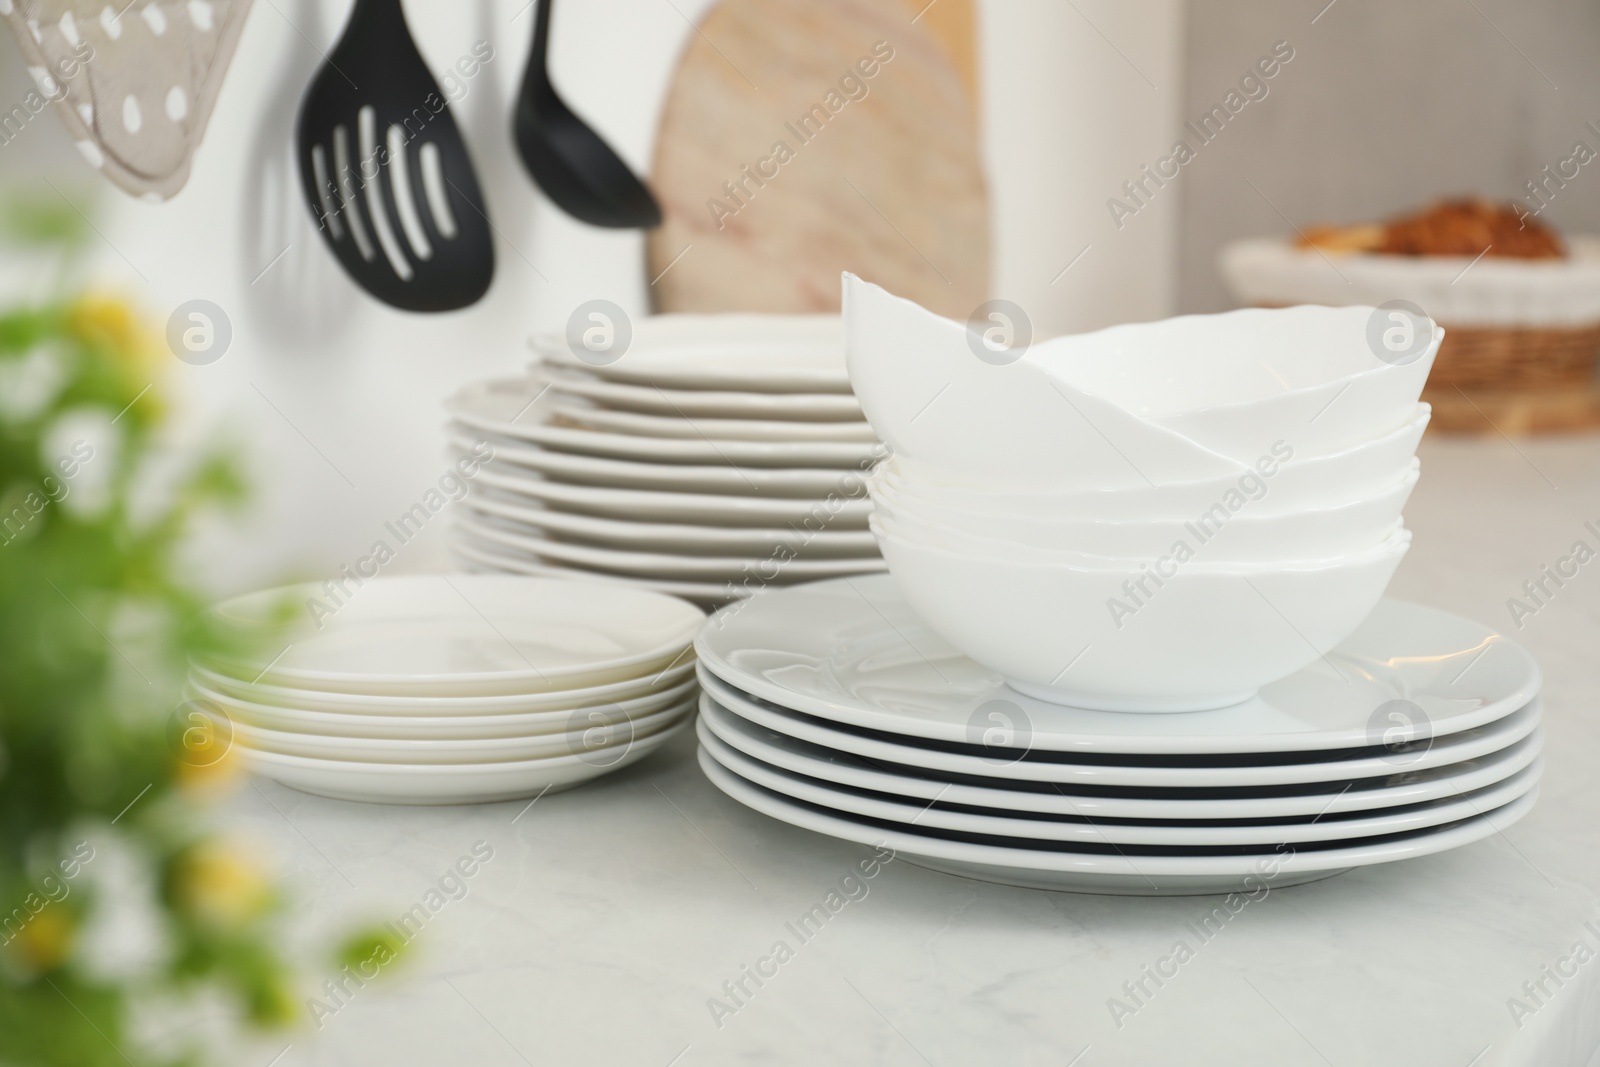 Photo of Clean plates and bowls on white marble countertop in kitchen